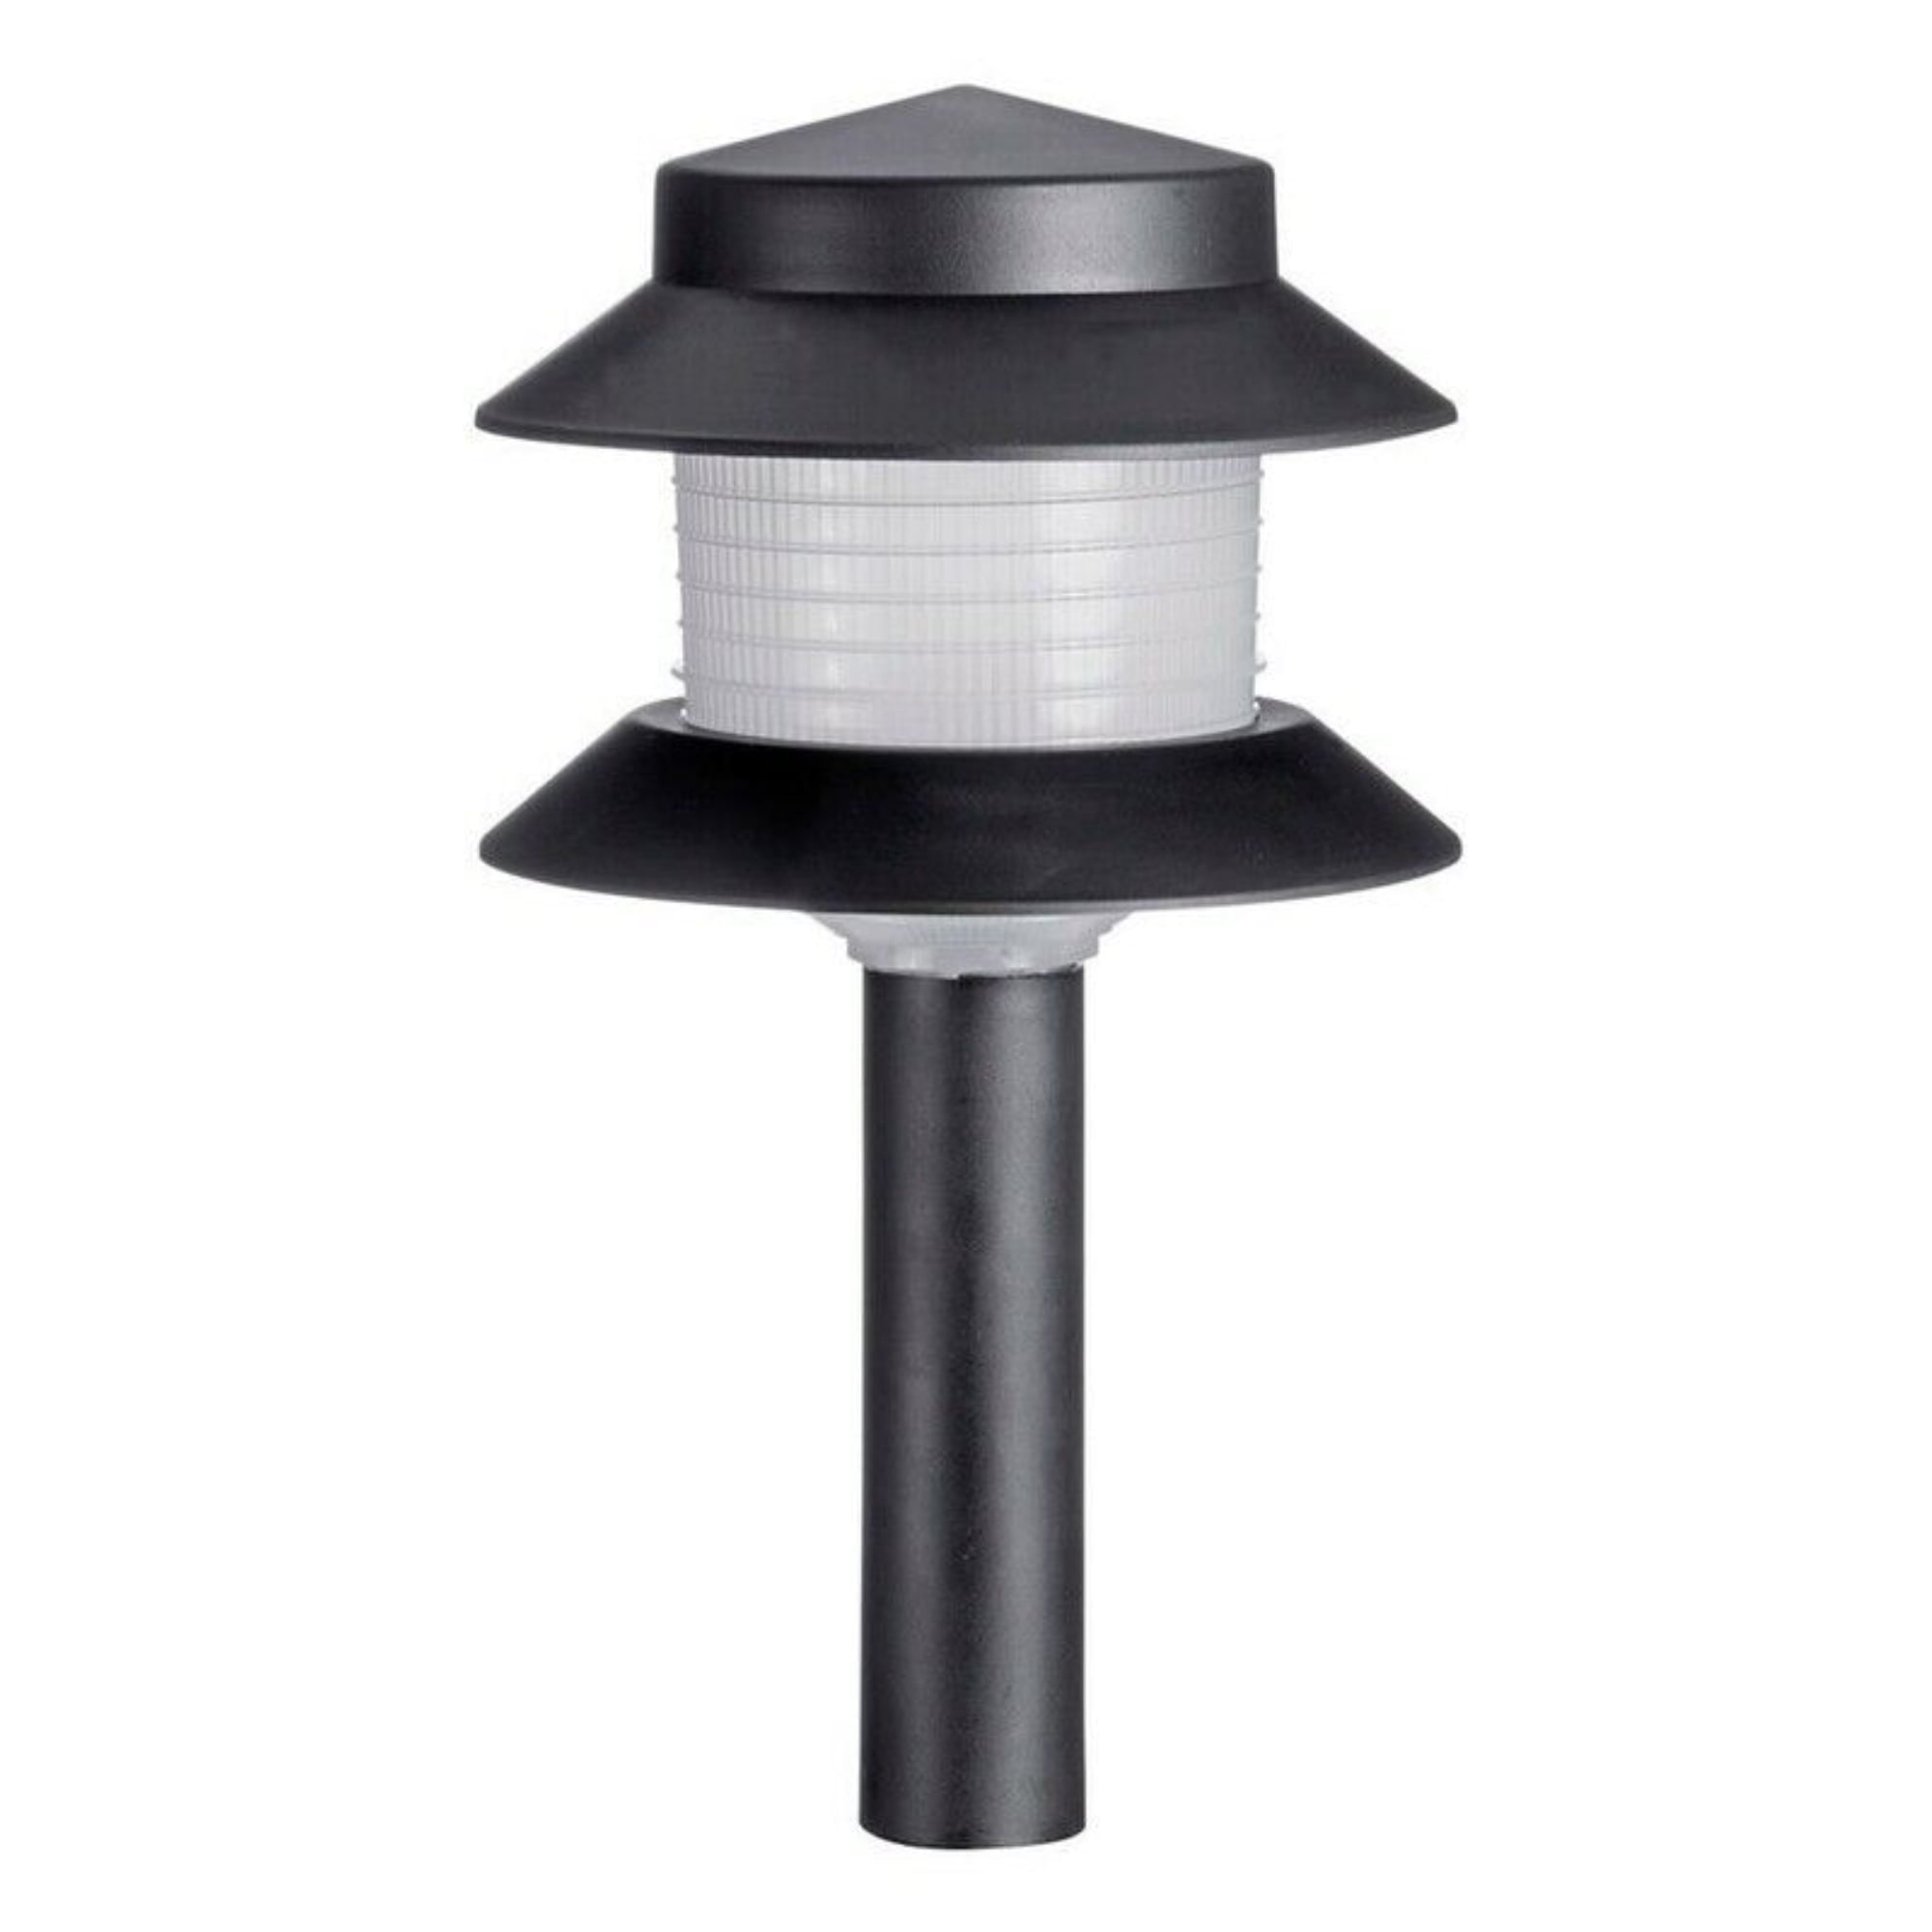 Sterno Home (#GL42171) Two-tiered Outdoor Landscaping Path Light， Black (Power Pack and Landscape Wire Sold Separately)